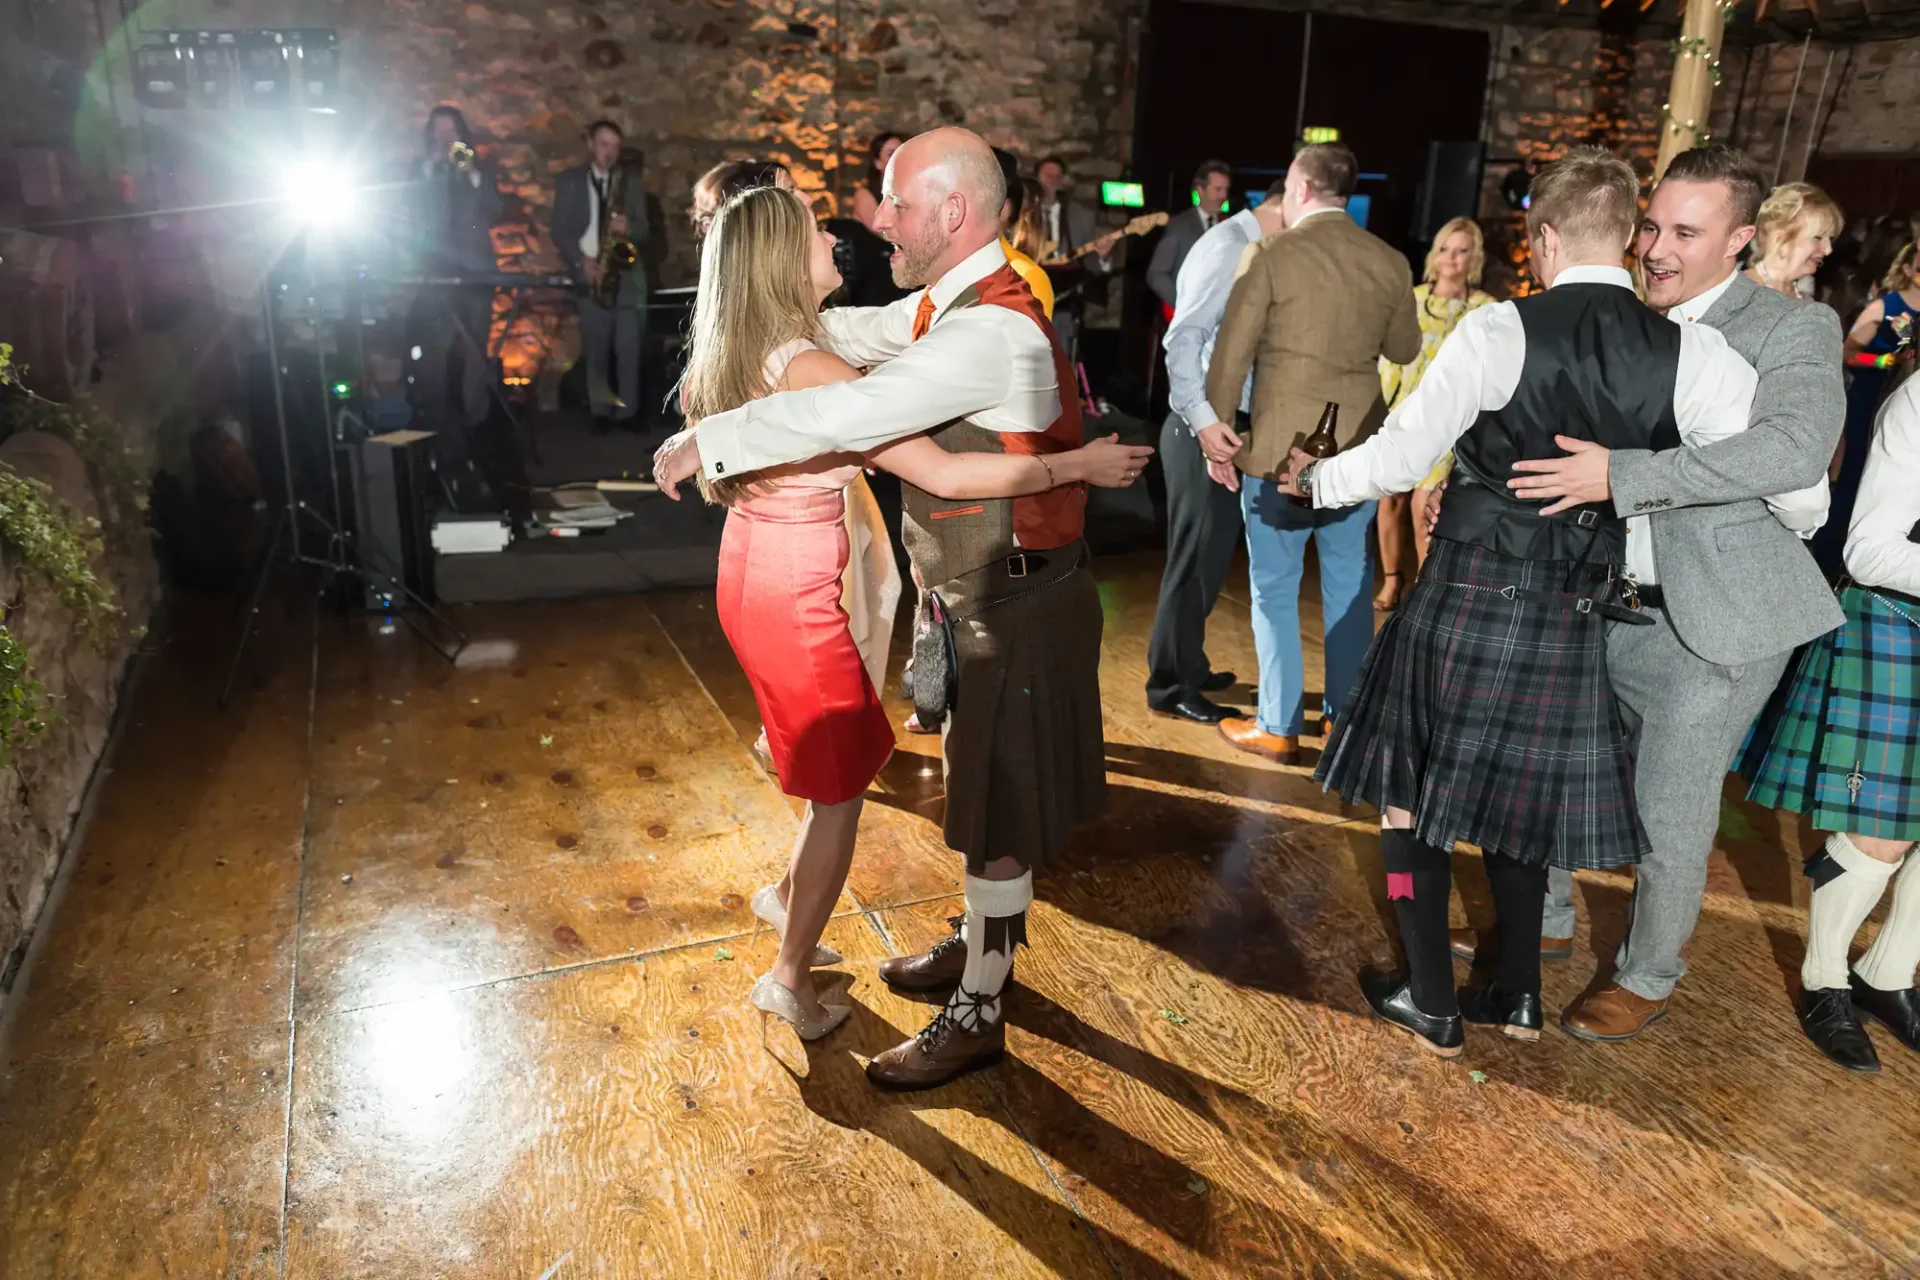 Couples dancing in a lively setting, one man wearing traditional scottish attire, with a band playing in the background.